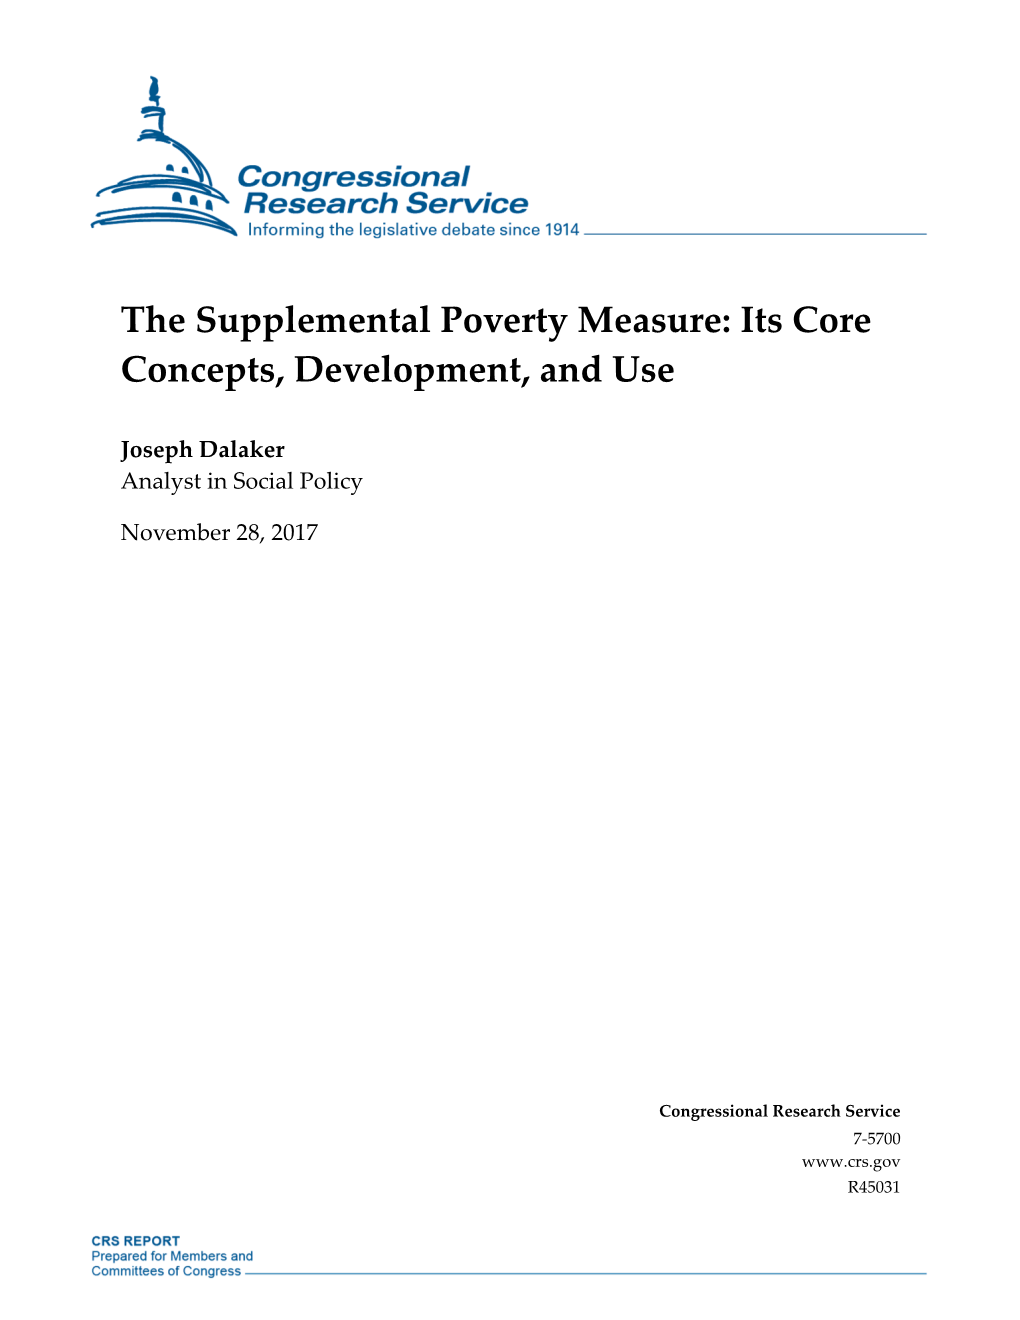 Supplemental Poverty Measure: Its Core Concepts, Development, and Use